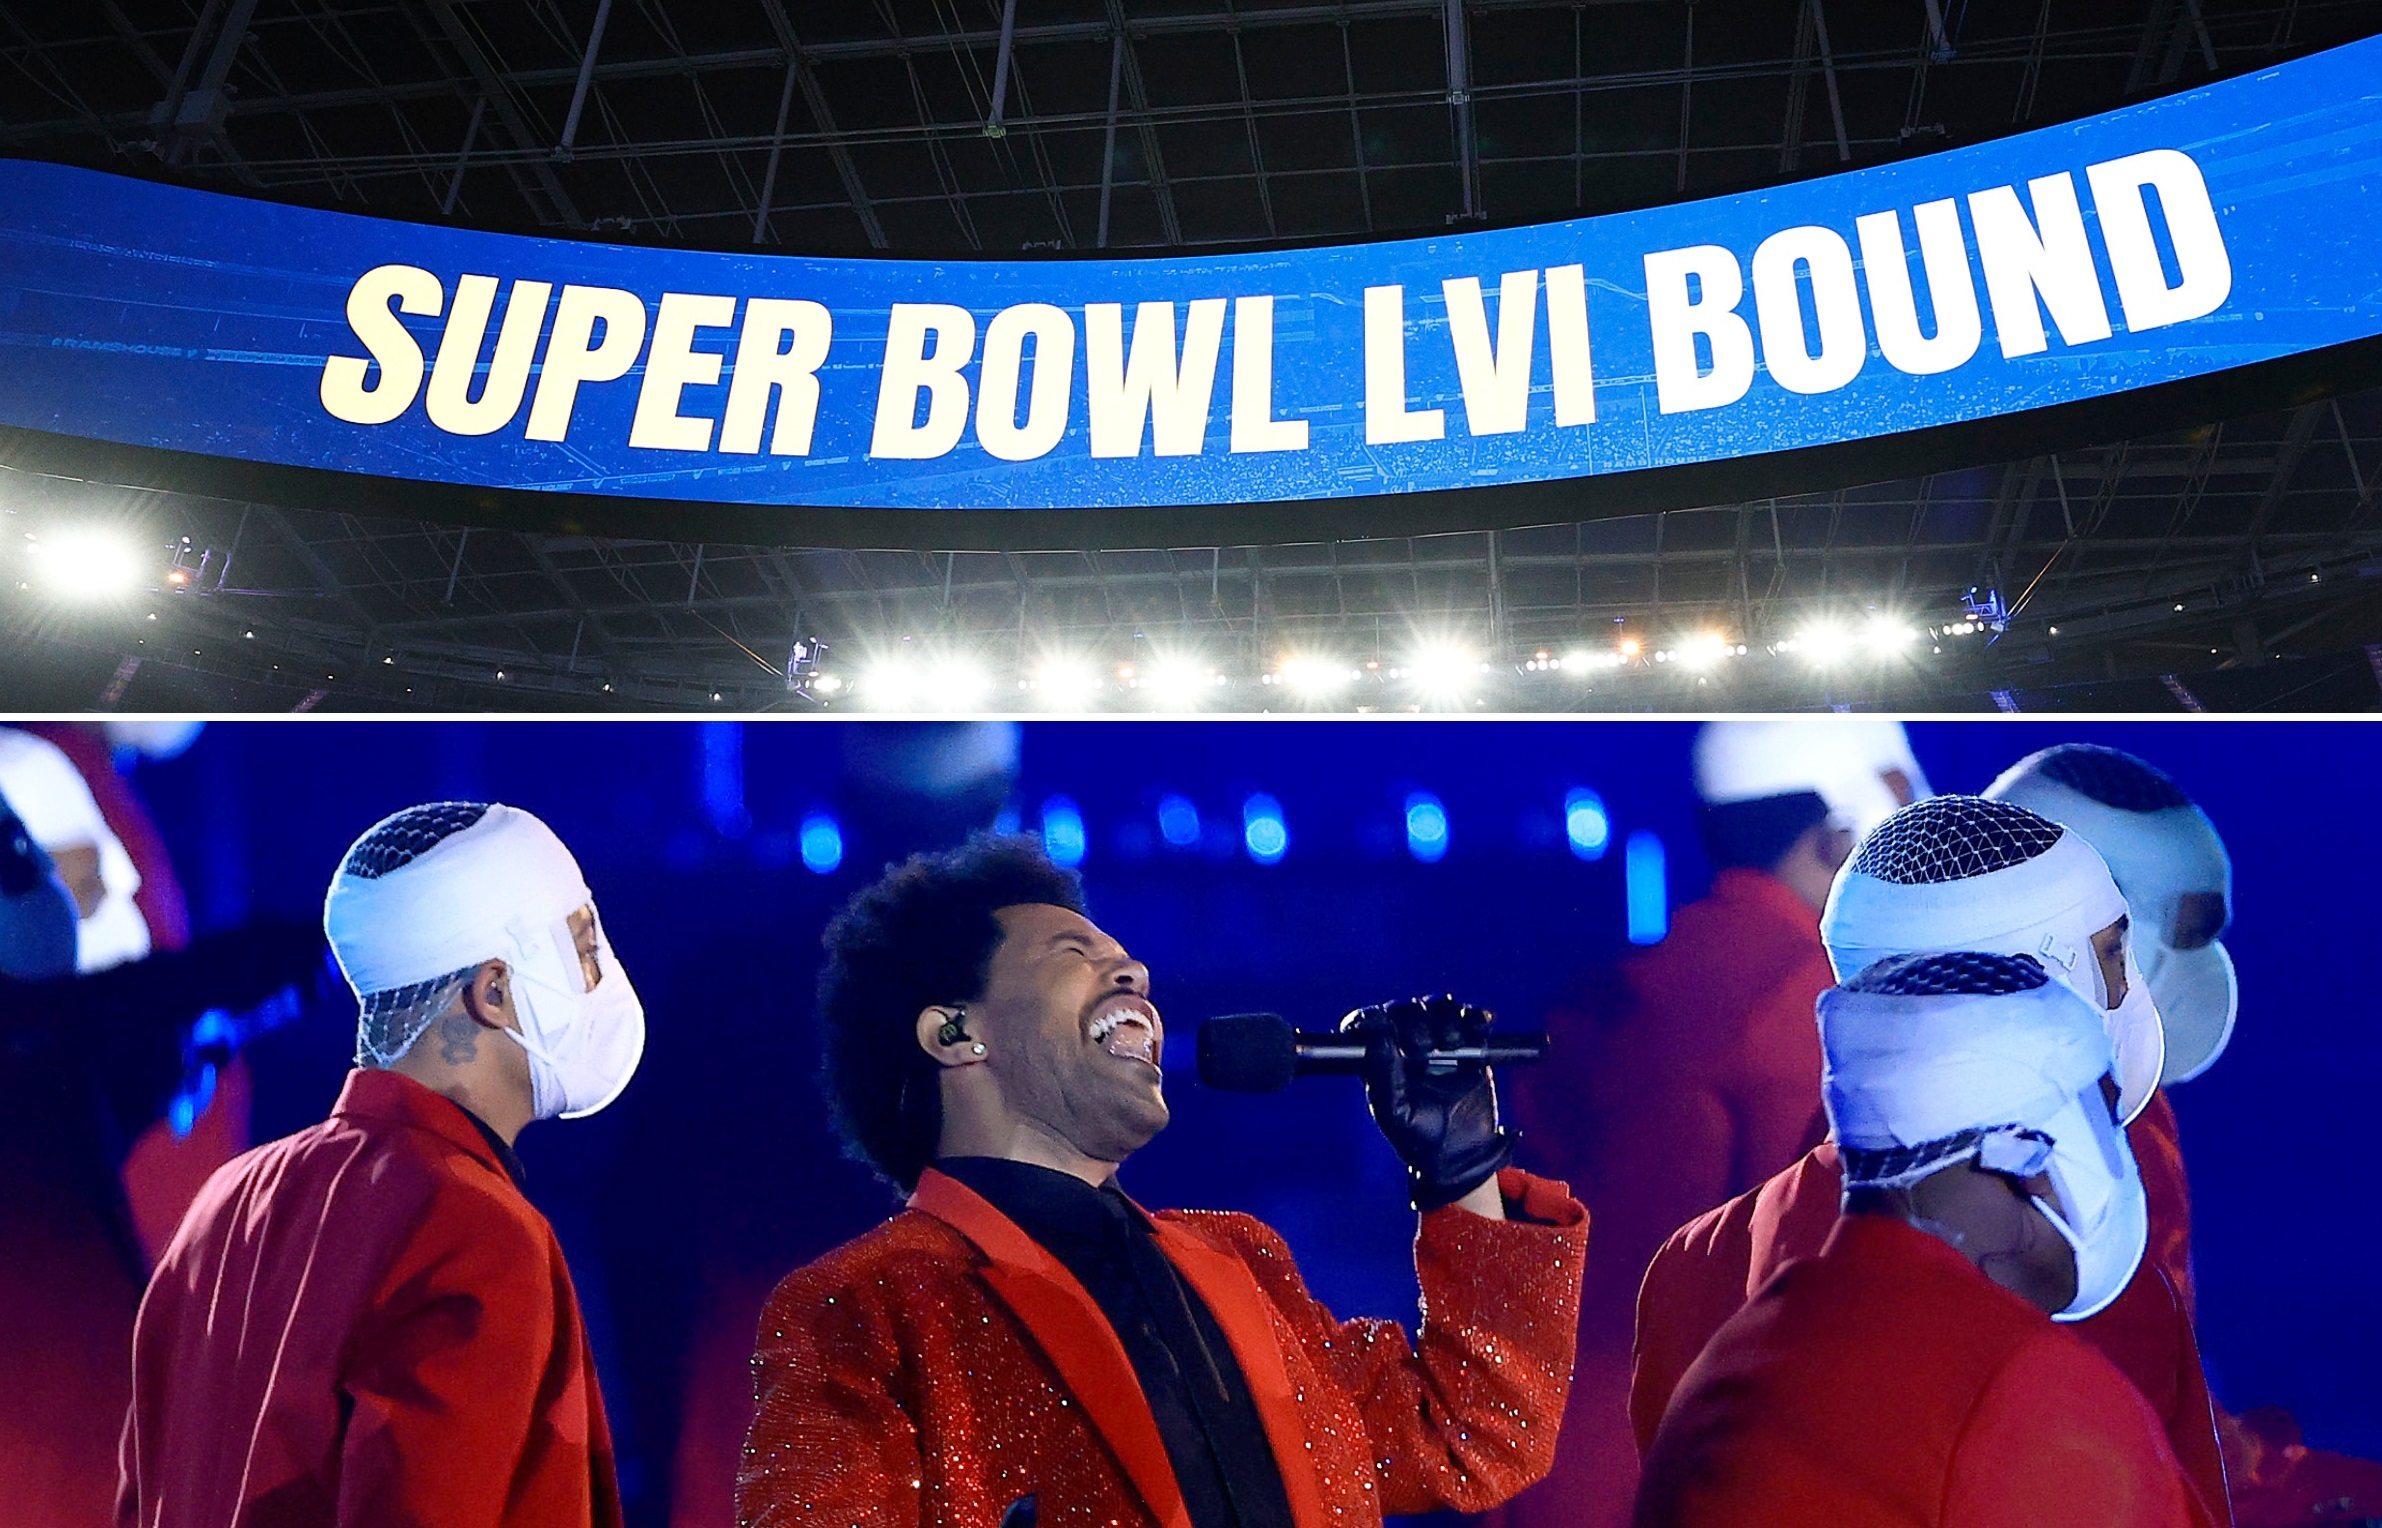 Who Is Performing at the Super Bowl 2022 Half Time Show?